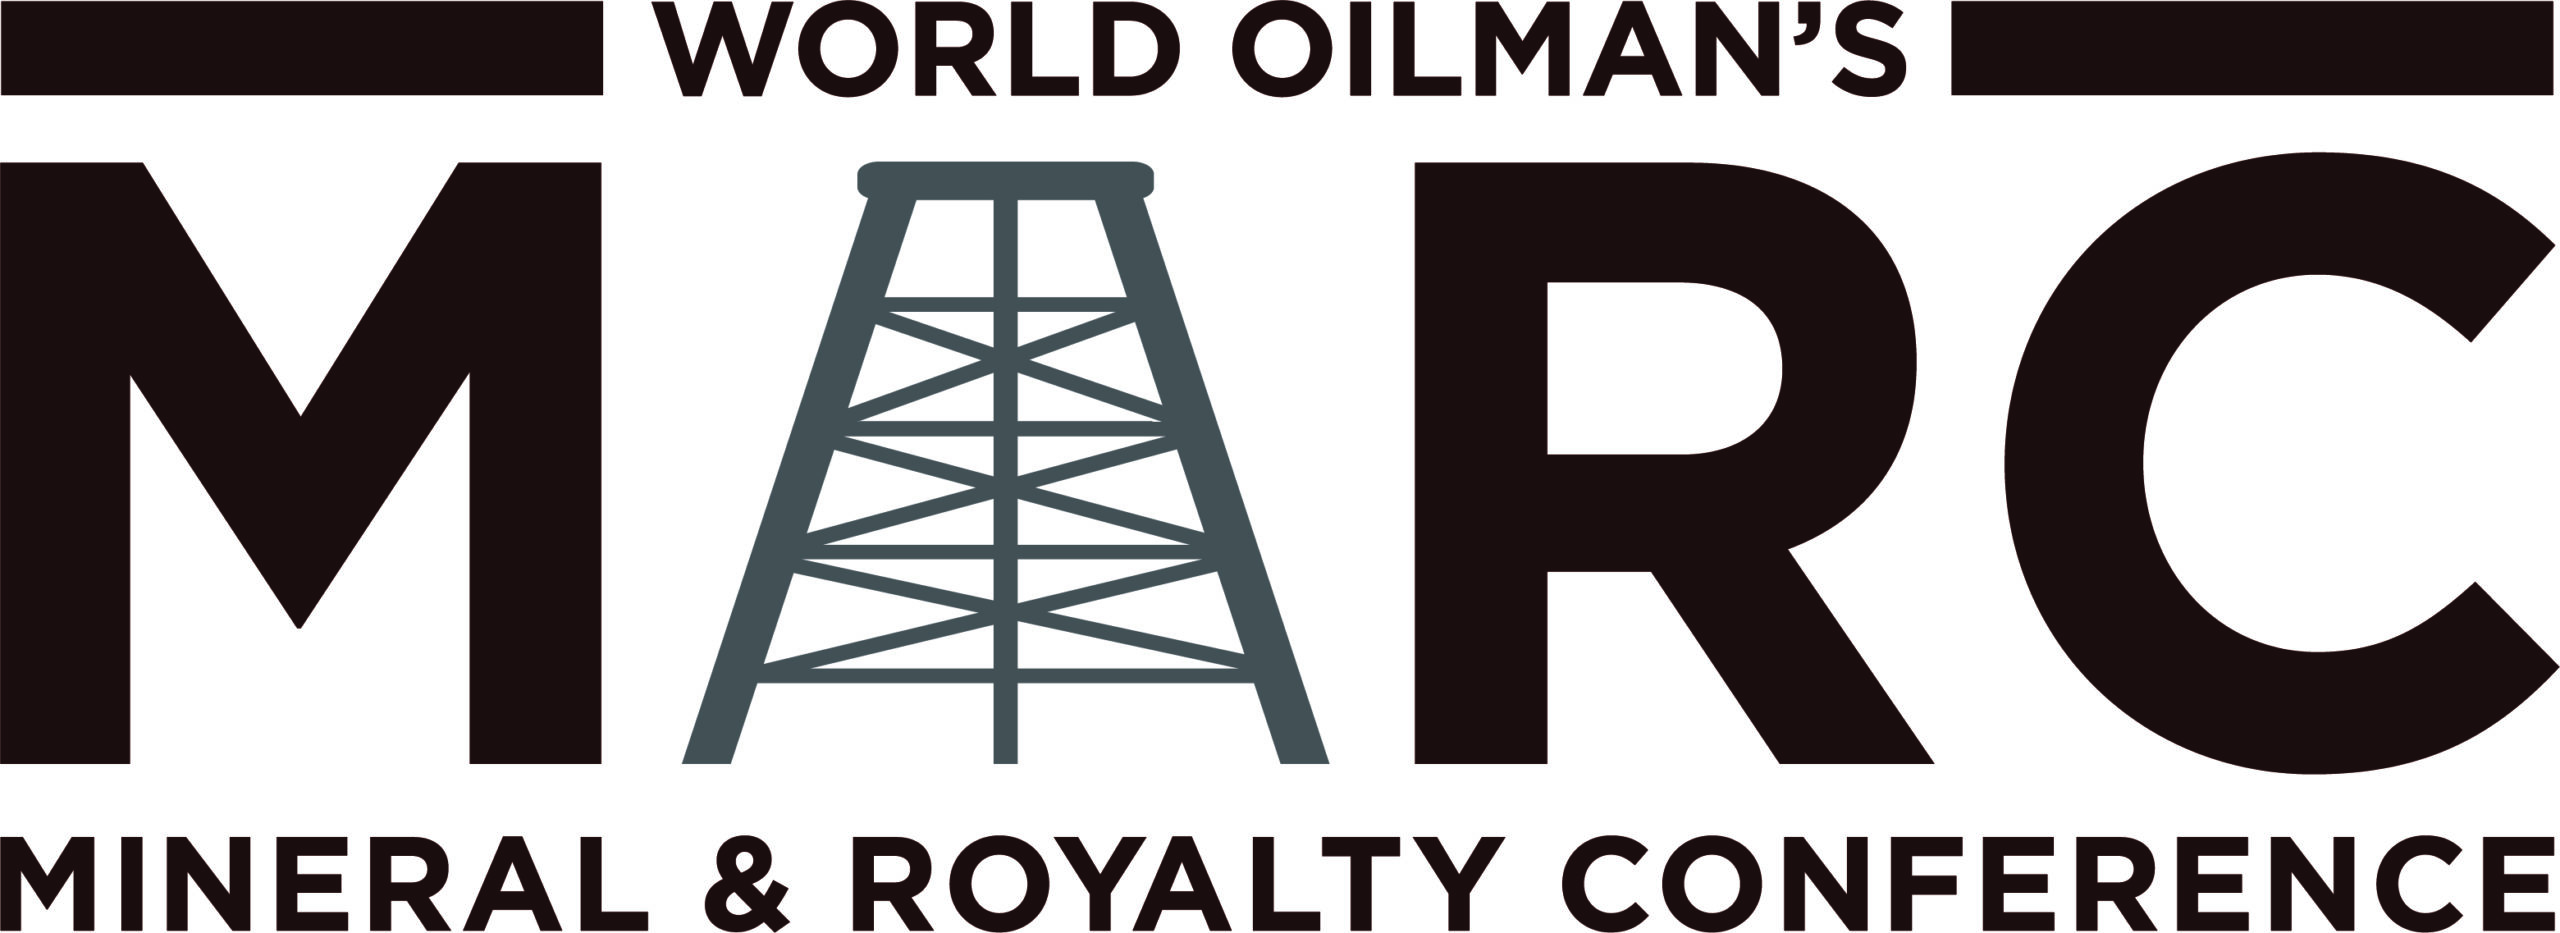 Mineral & Royalty Conference (MARC) includes Sourcenergy CEO, Featured Speaker